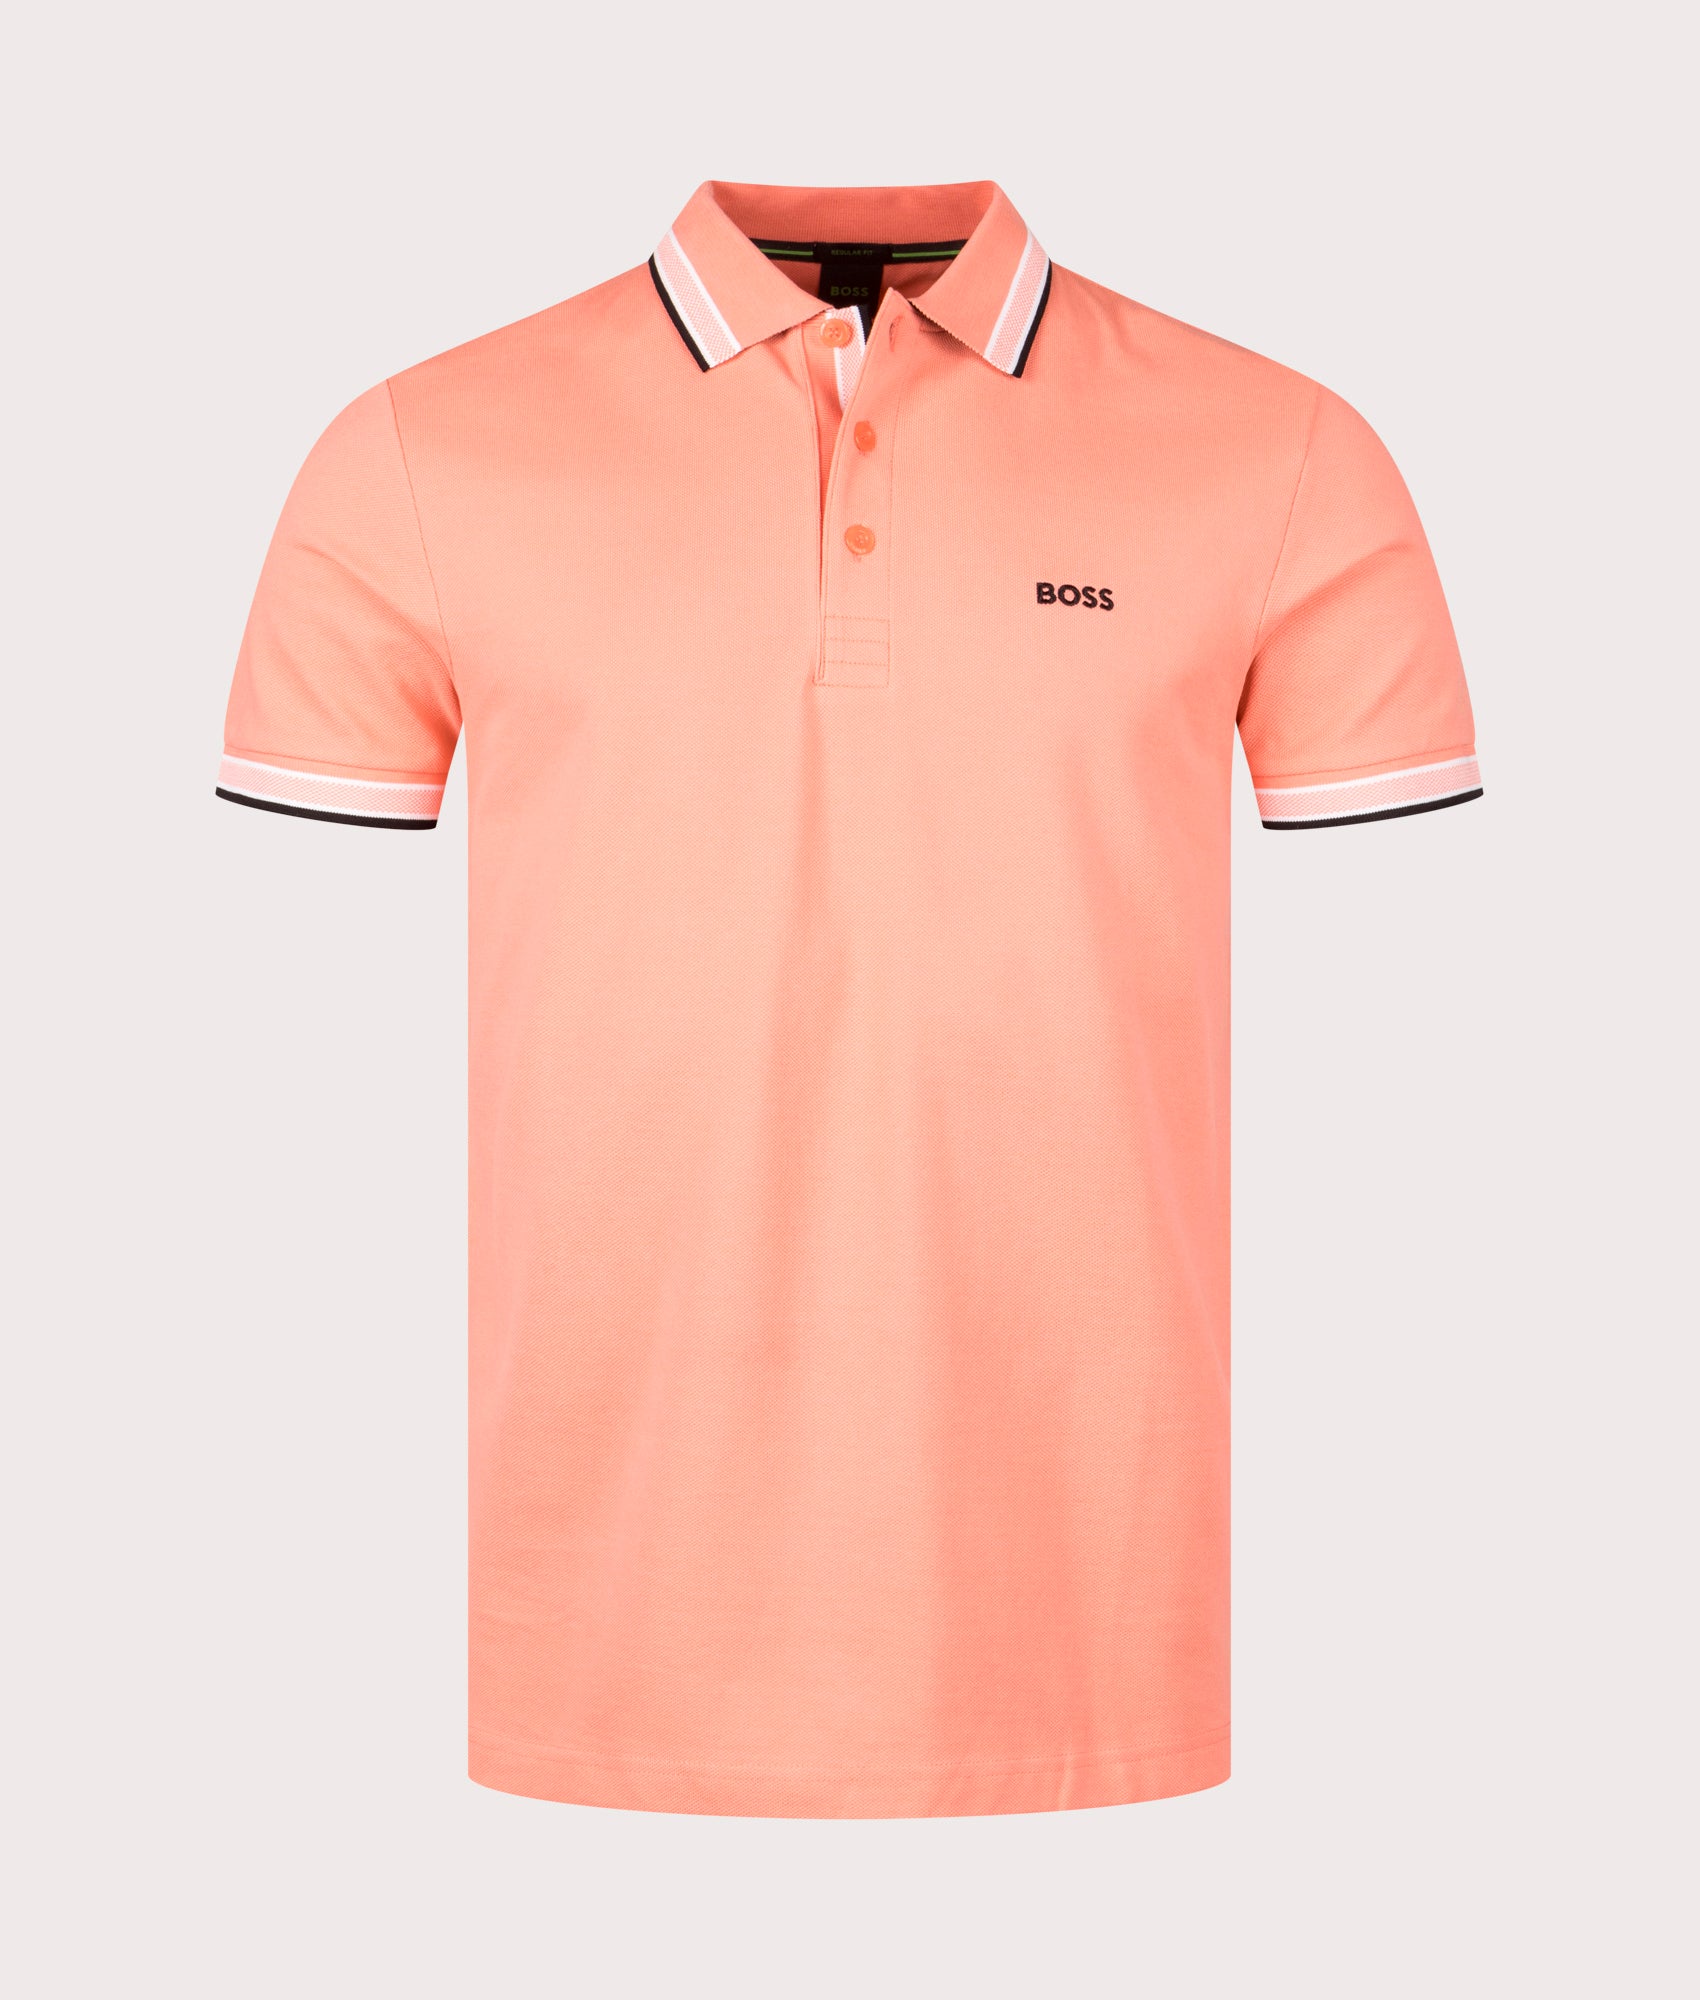 BOSS Mens Paddy Polo Shirt - Colour: 649 Open Red - Size: Medium